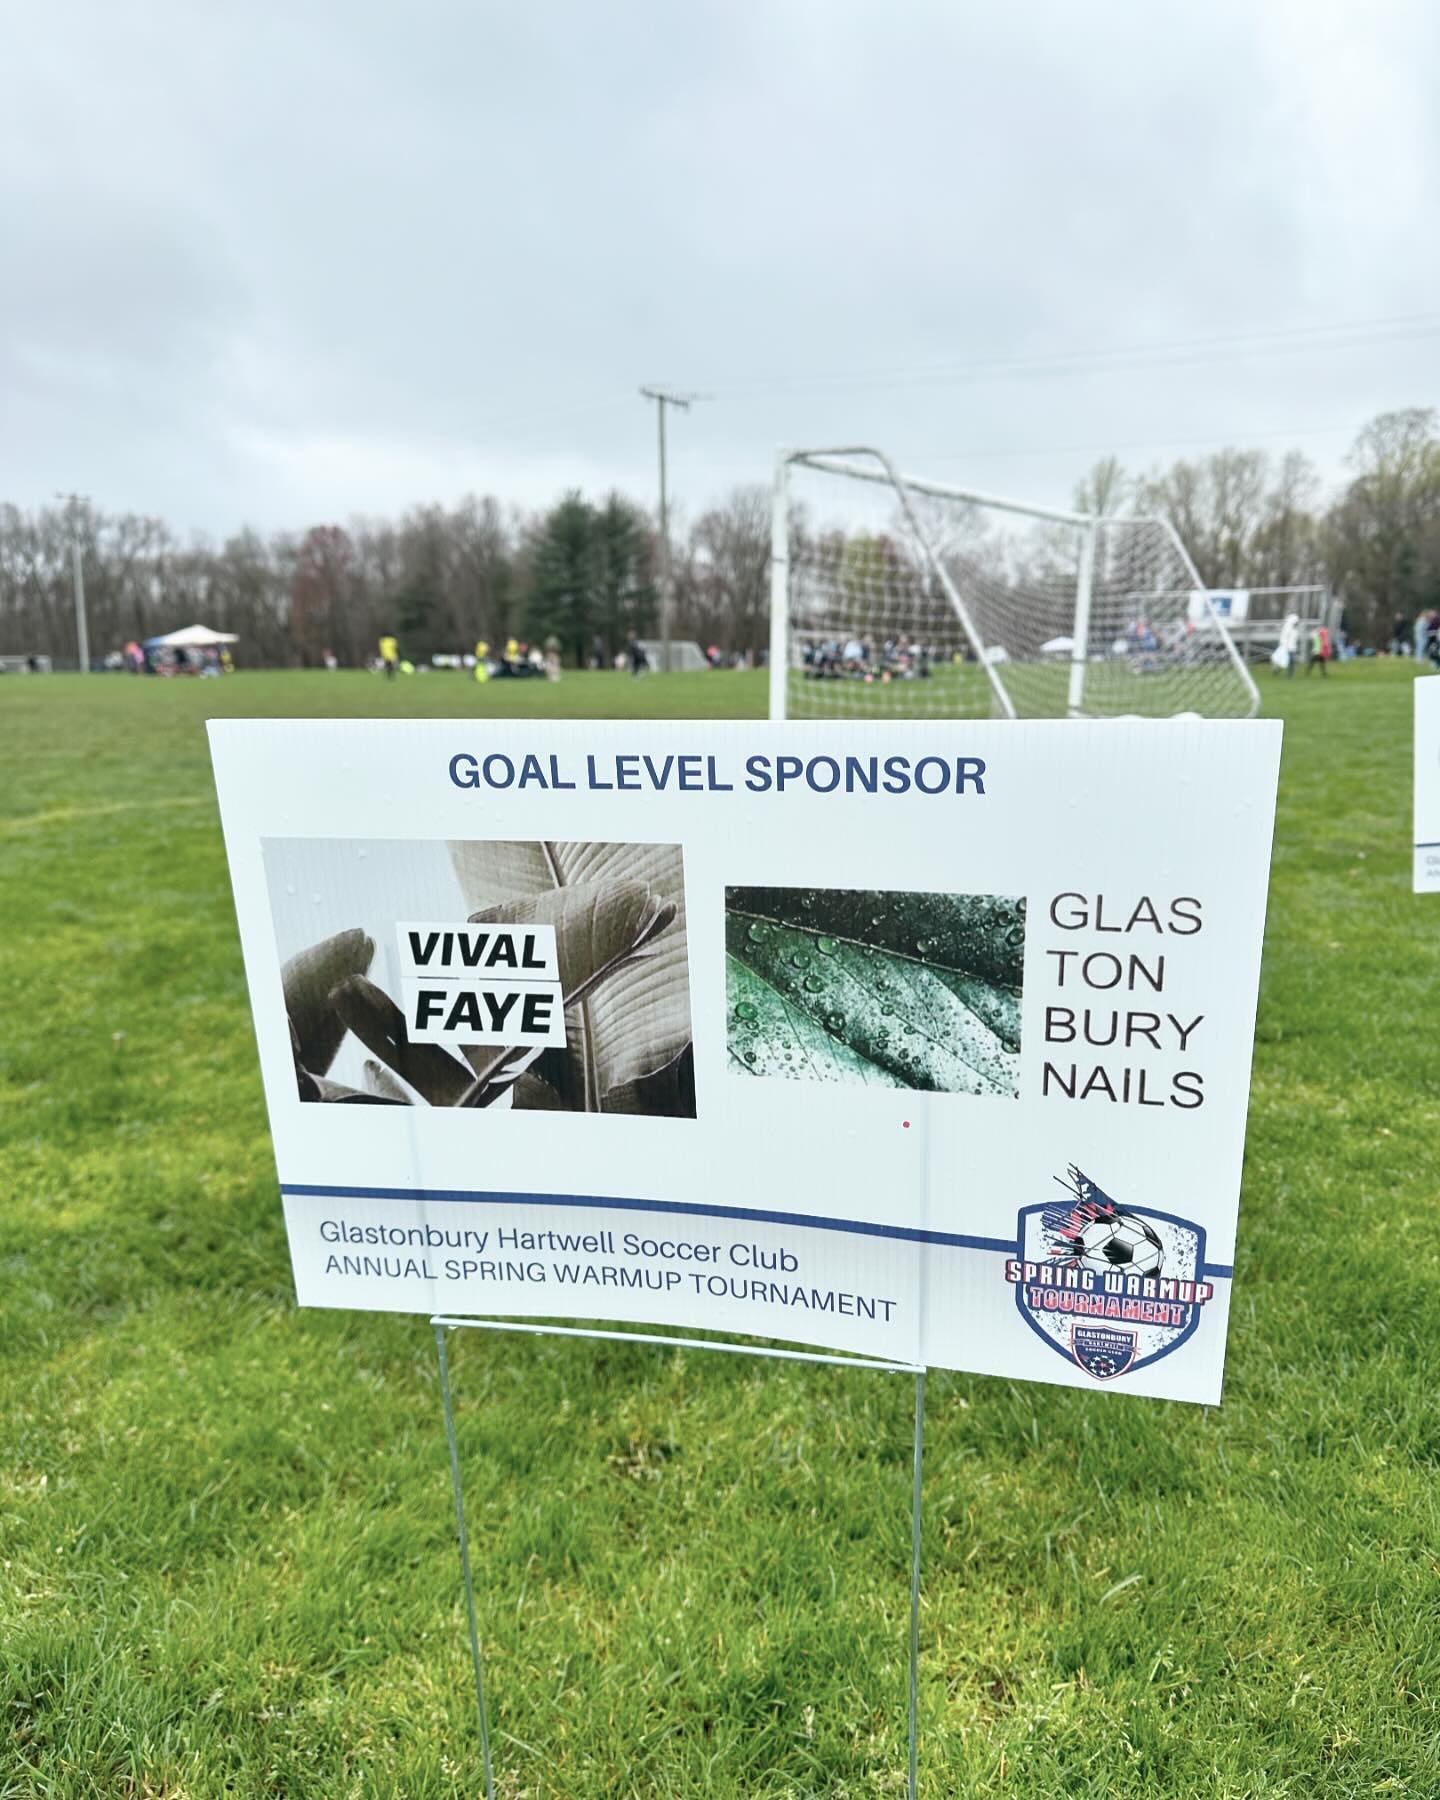 You already know I&rsquo;m a proud soccer mom! ⚽️ 🥅 Soccer tournament weekend! @vival.faye @hartwellspringwarmup @glastonburyhartwellsoccer #lessismore #minimalist #soccer #soccerlife #soccertournament #soccermom #soccersponsorship #supportsmallbusi